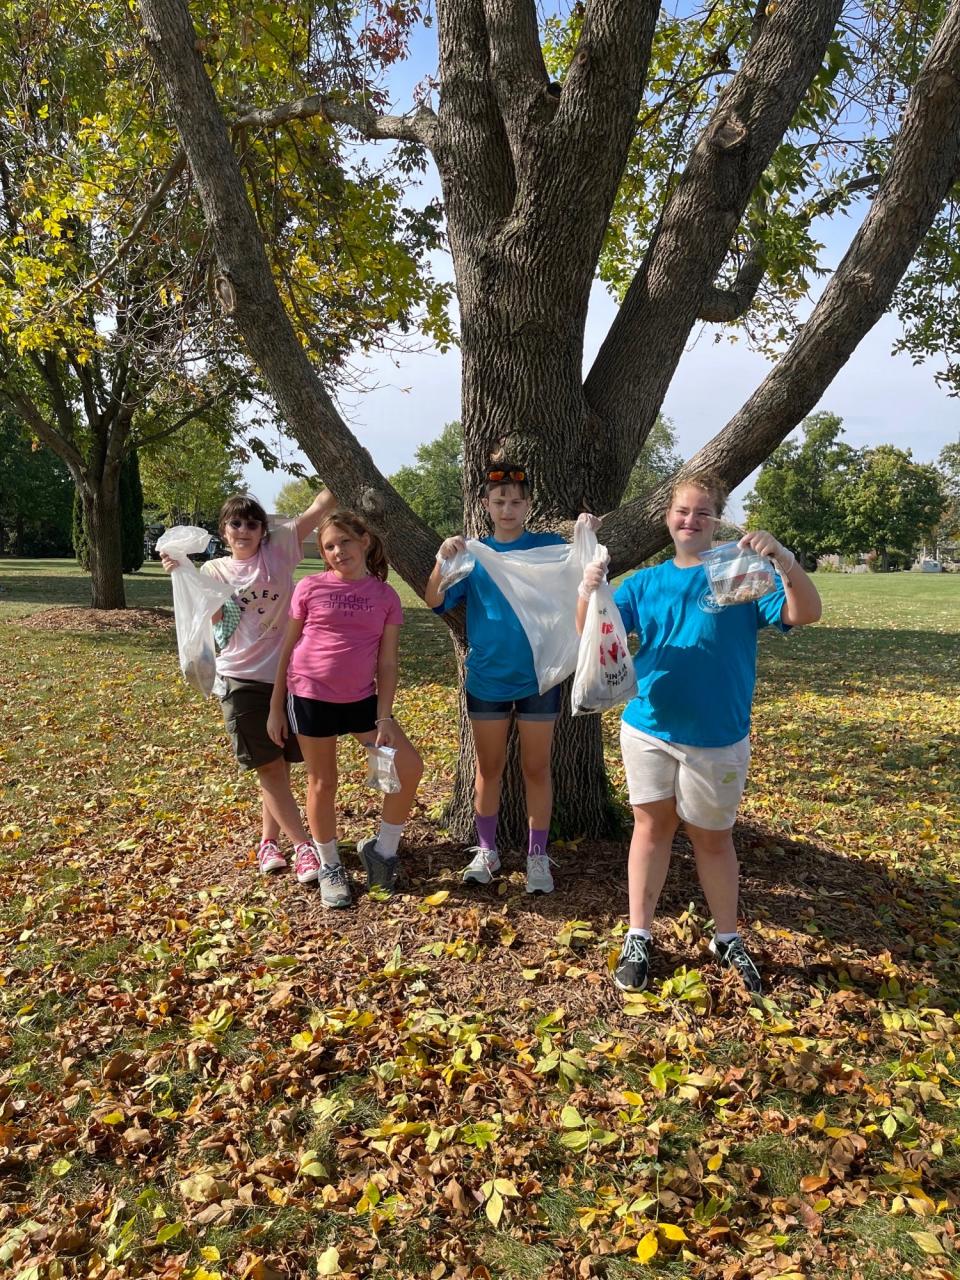 Audrey Egge and other Cub Scouts collect cigarette butts at a North Liberty Park, part of the research Troop 270 did to convince the city to ban tobacco products in public parks.